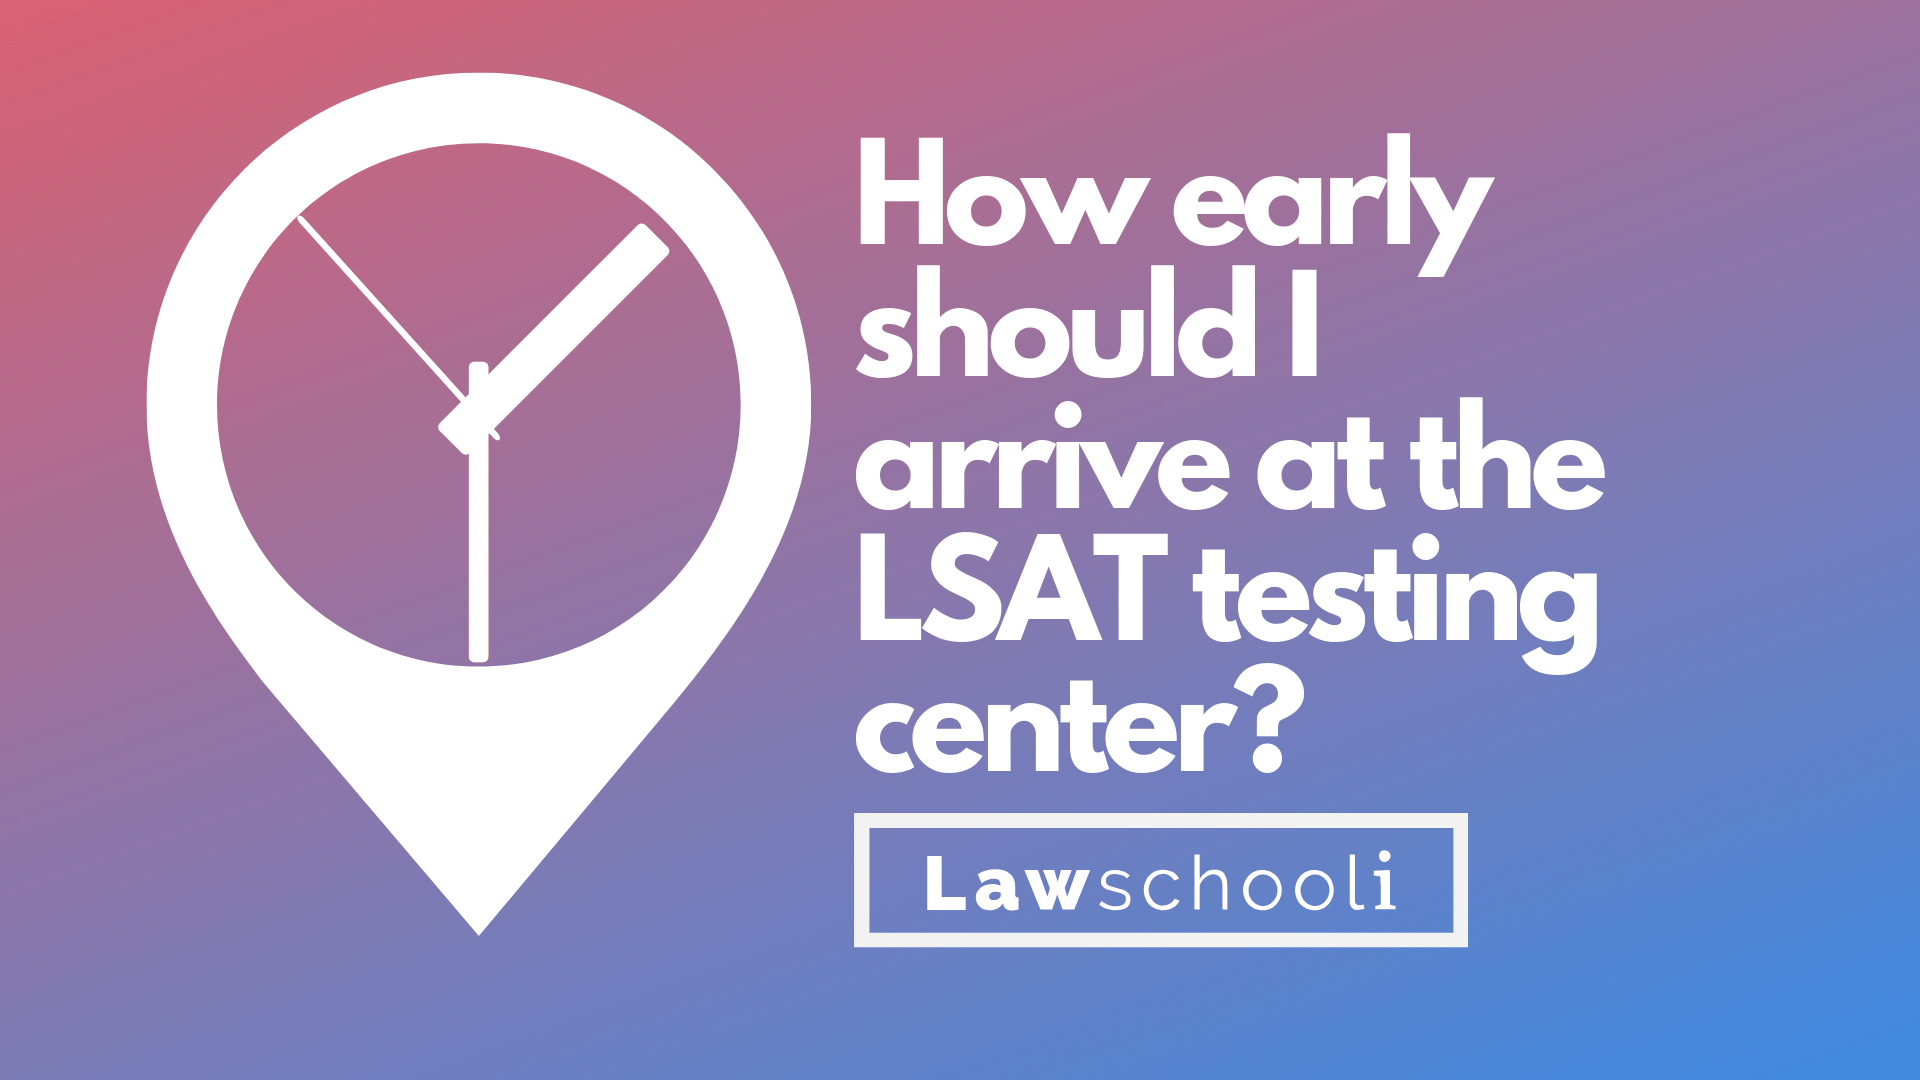 How Early Should I Arrive At The LSAT Testing Center? LawSchooli